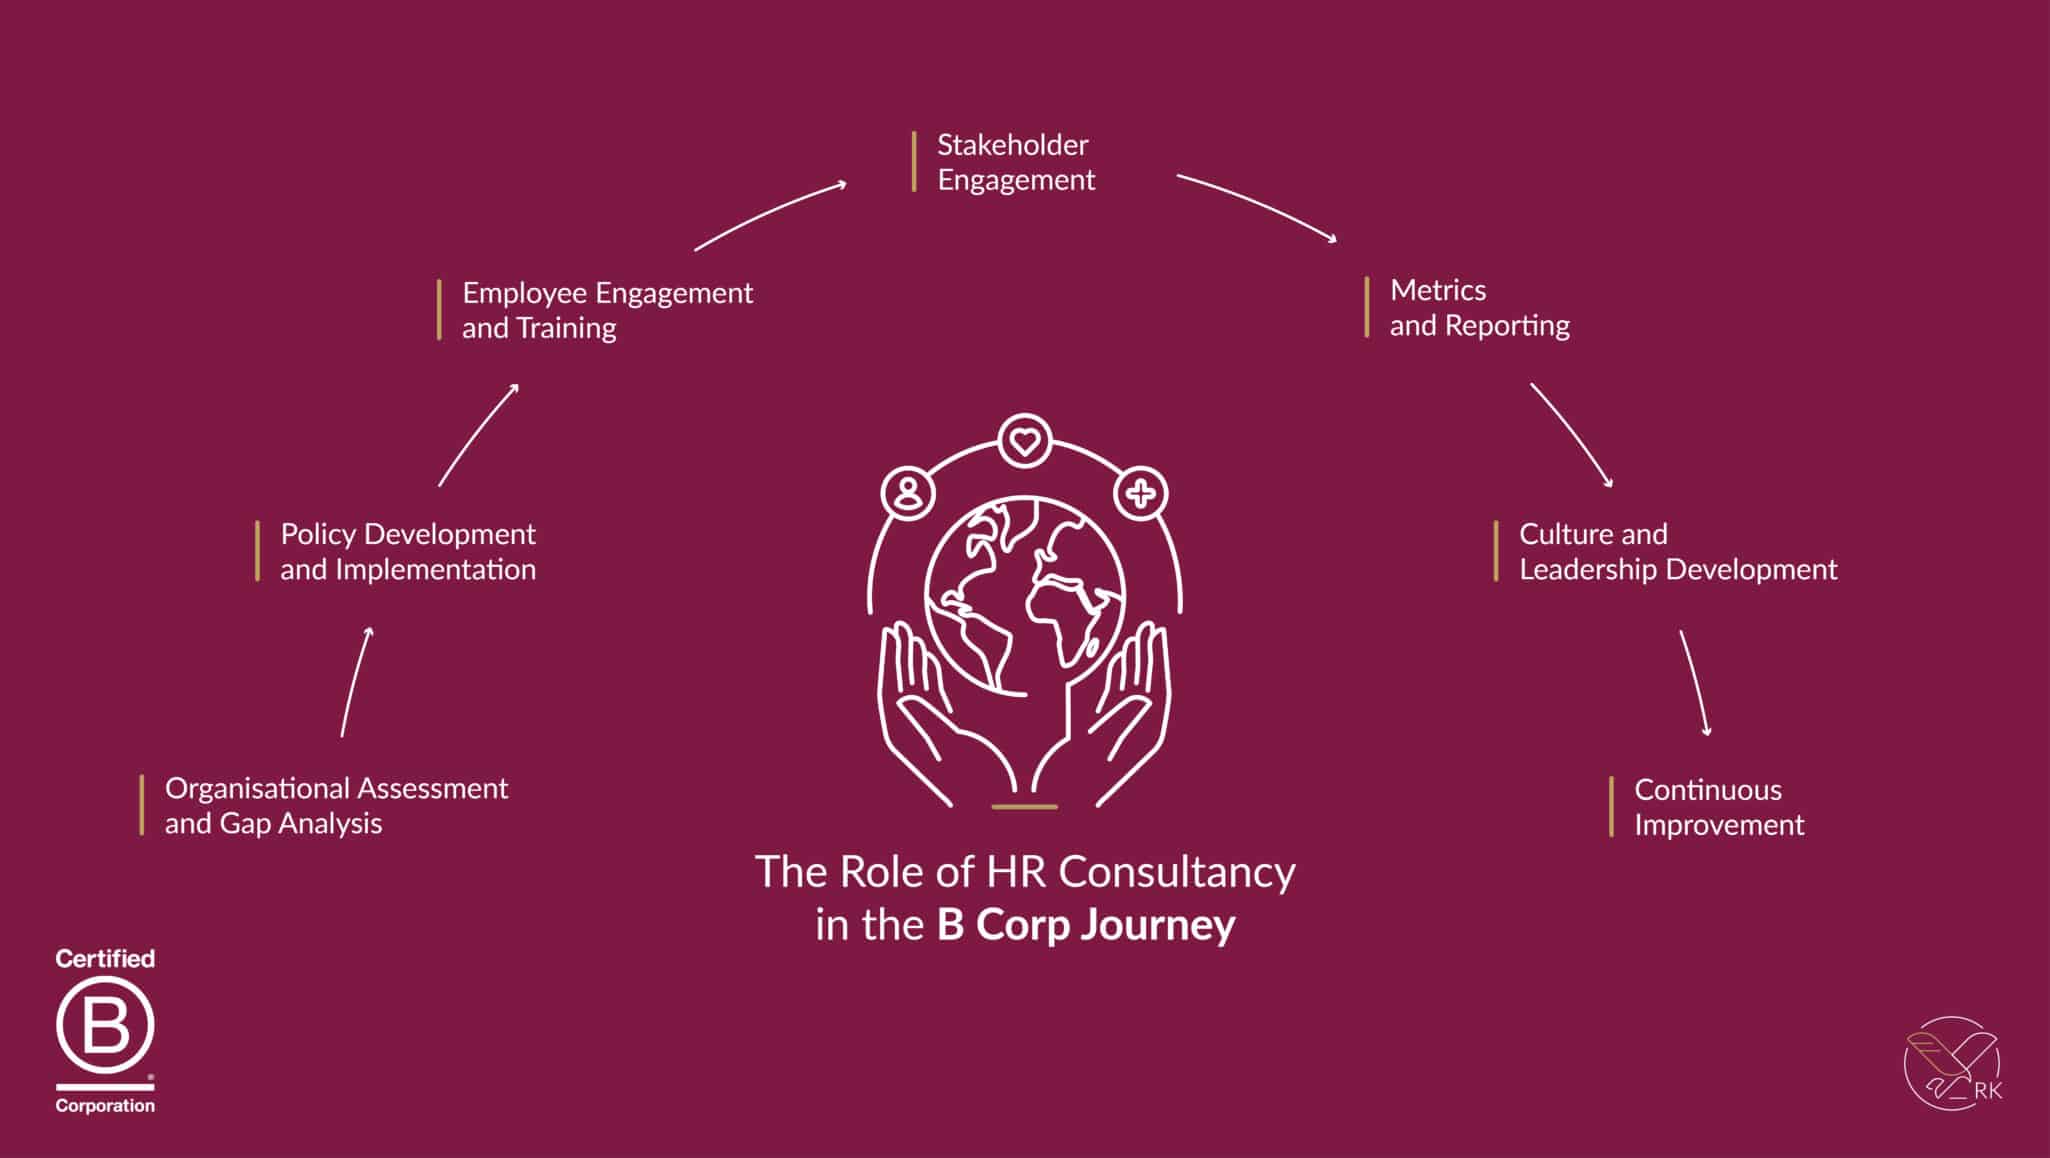 The Role of HR Consultancy in the B Corp Accreditation Journey